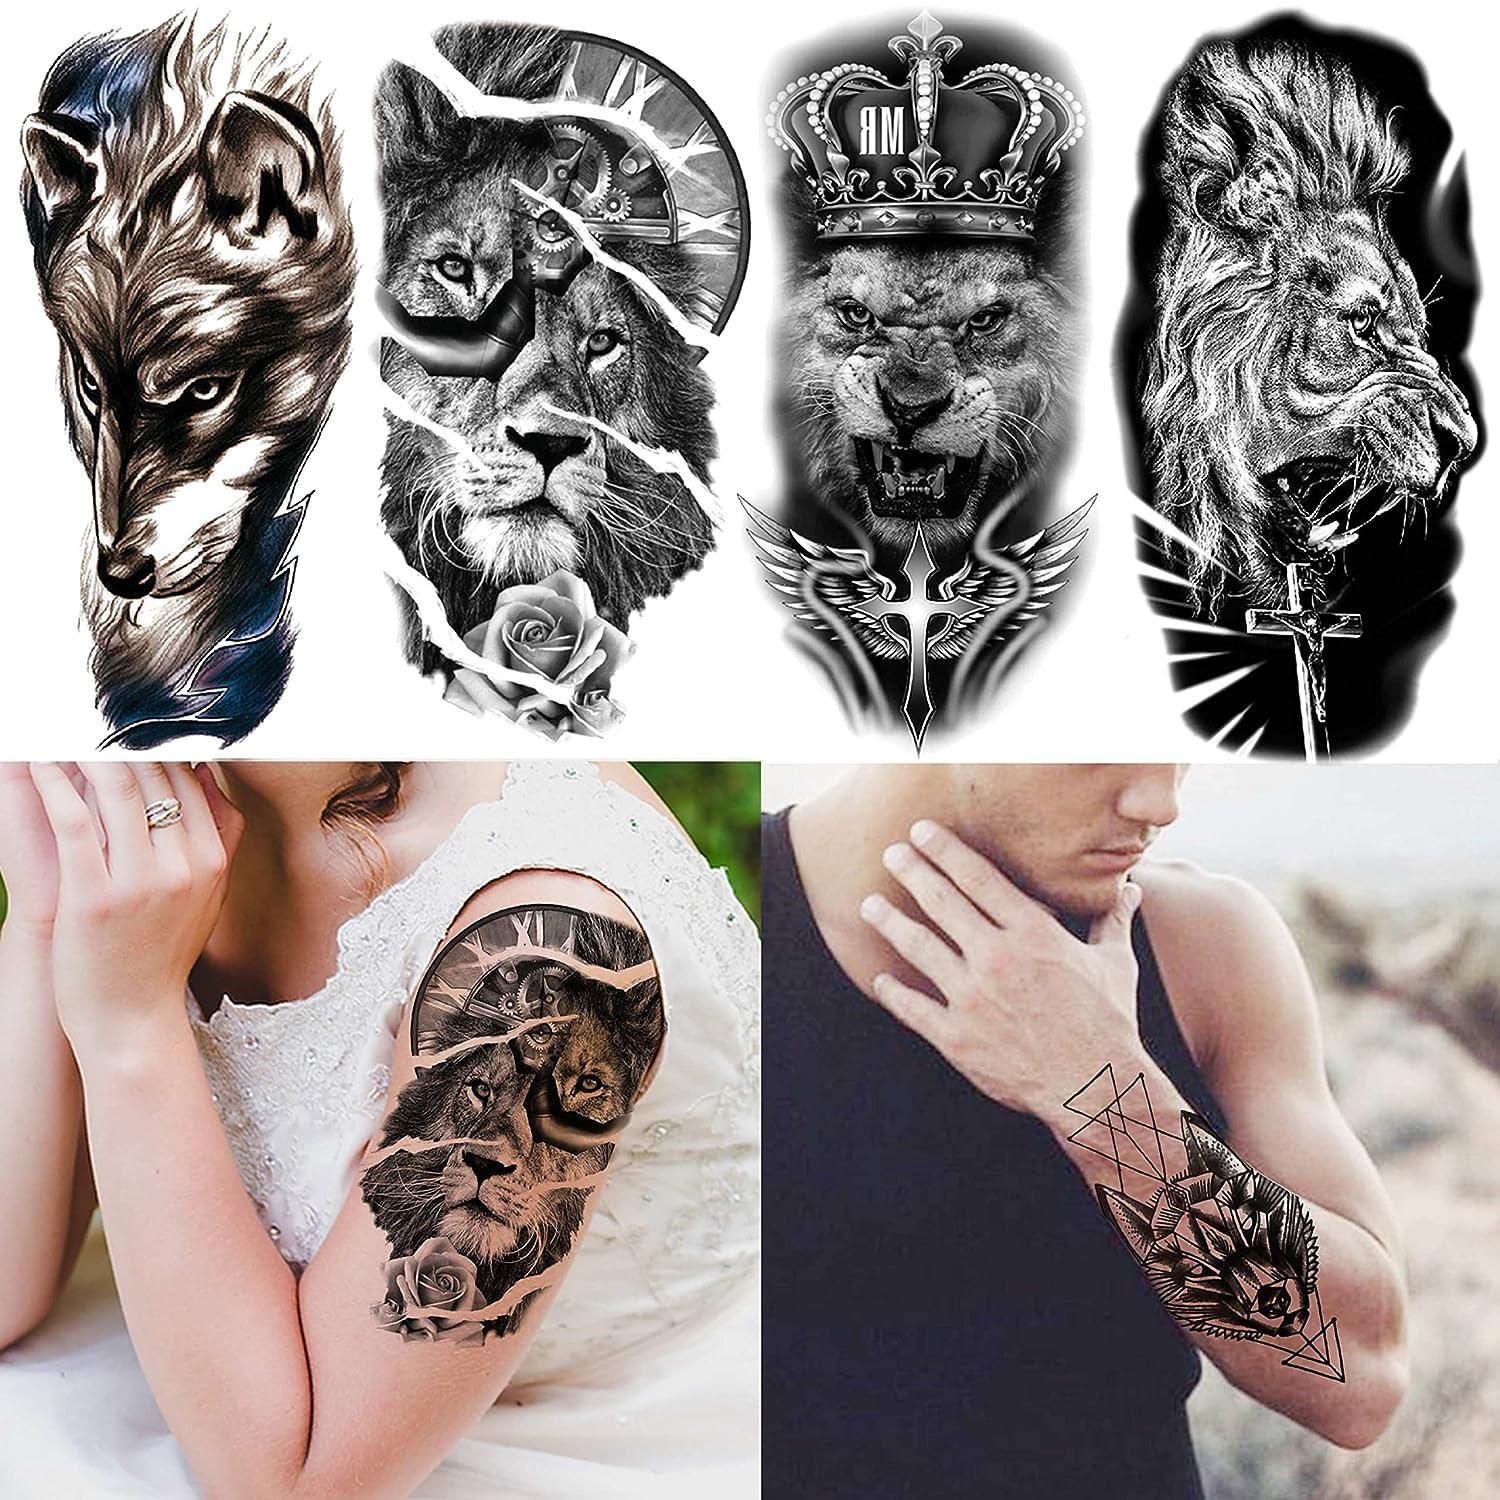 Amazon.com : Black Eagle Temporary Tattoos Sleeve For Men Adults Tiger And  Lion Robot Arm Tatoo Extra Large Tattoo Stickers : Beauty & Personal Care